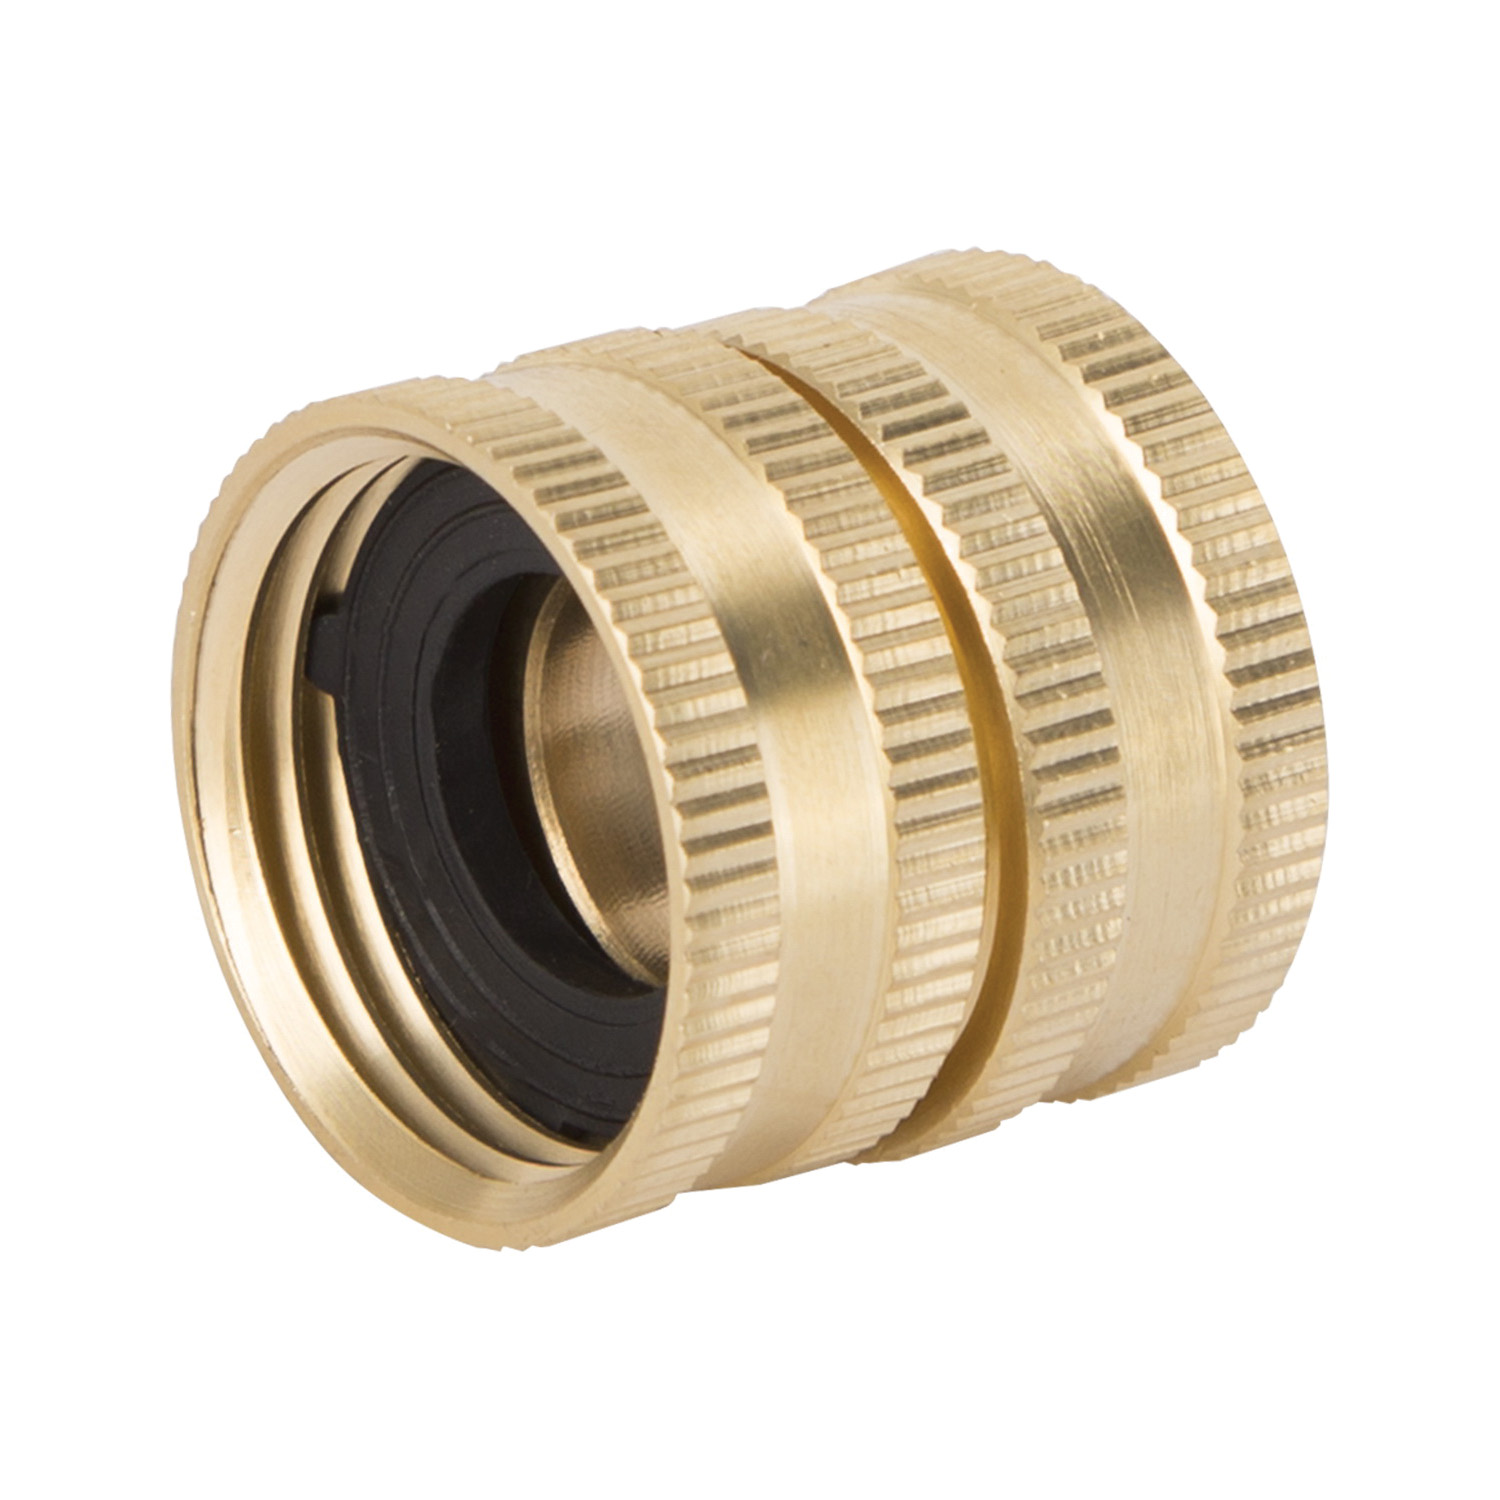 GHADTRS-10 Swivel Hose Connector, 3/4 x 3/4 in, FNH x FNH, Brass